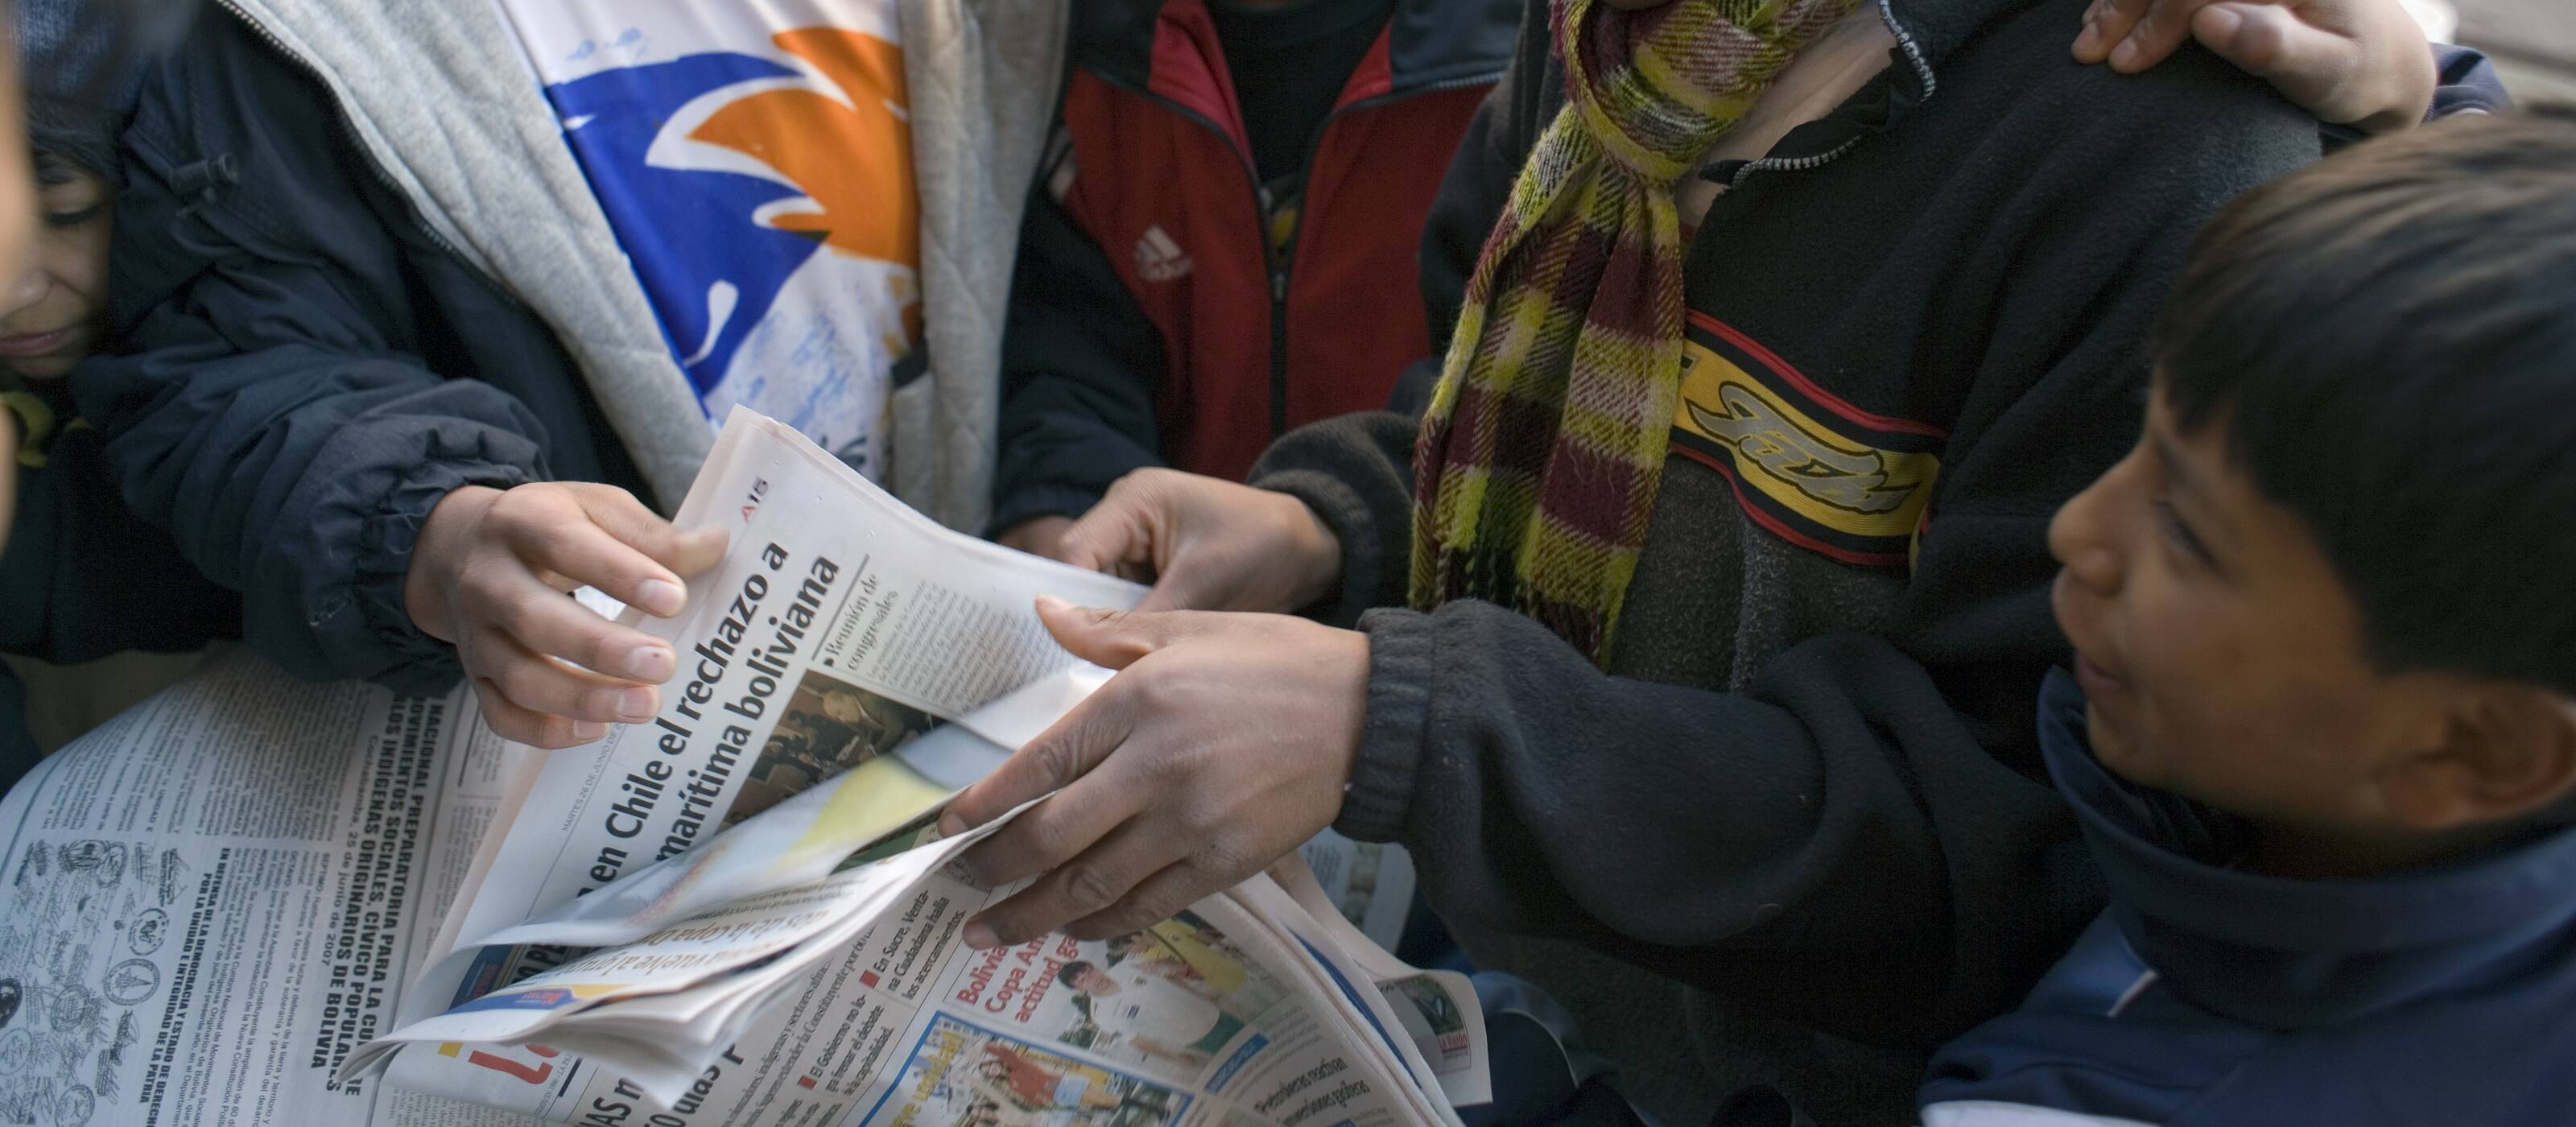 Young people get information in the newspaper 